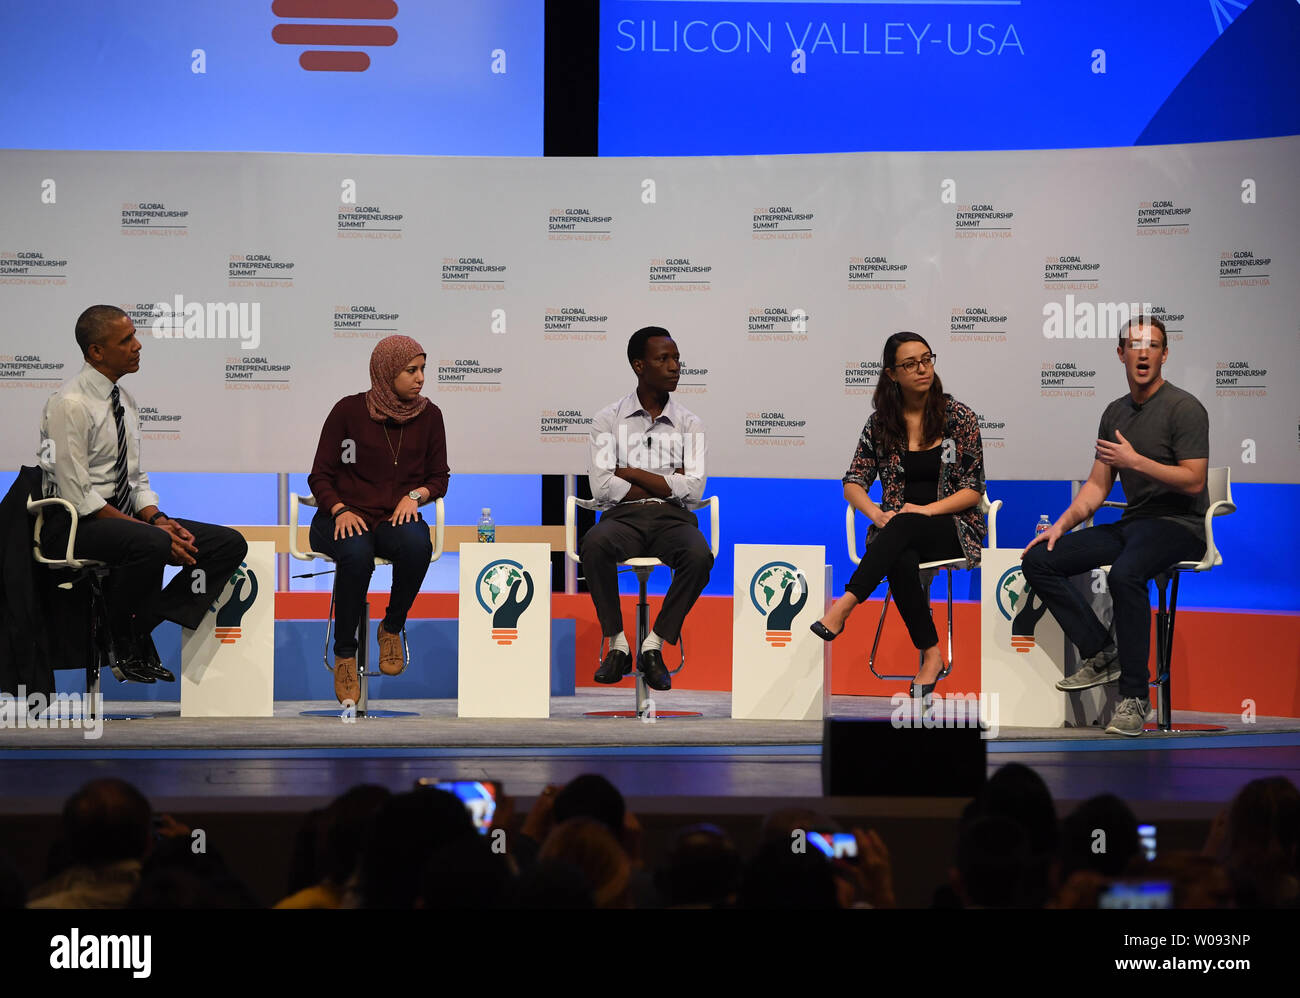 President Barack Obama (L) leads a panel discussion with (L-R) Mai Mediate of Egypt, Jean Bosco Nzeyimana of Rwanda, Mariana Costa Checa of Peru, and Facebook founder Mark Zuckerberg at the Global Entrepreneurship Summit 2016 at Stanford University in Palo Alto, California on June 24,  2016. GES aims to connect American entrepreneurs and investors with international counterparts.          Photo by Terry Schmitt/UPI Stock Photo